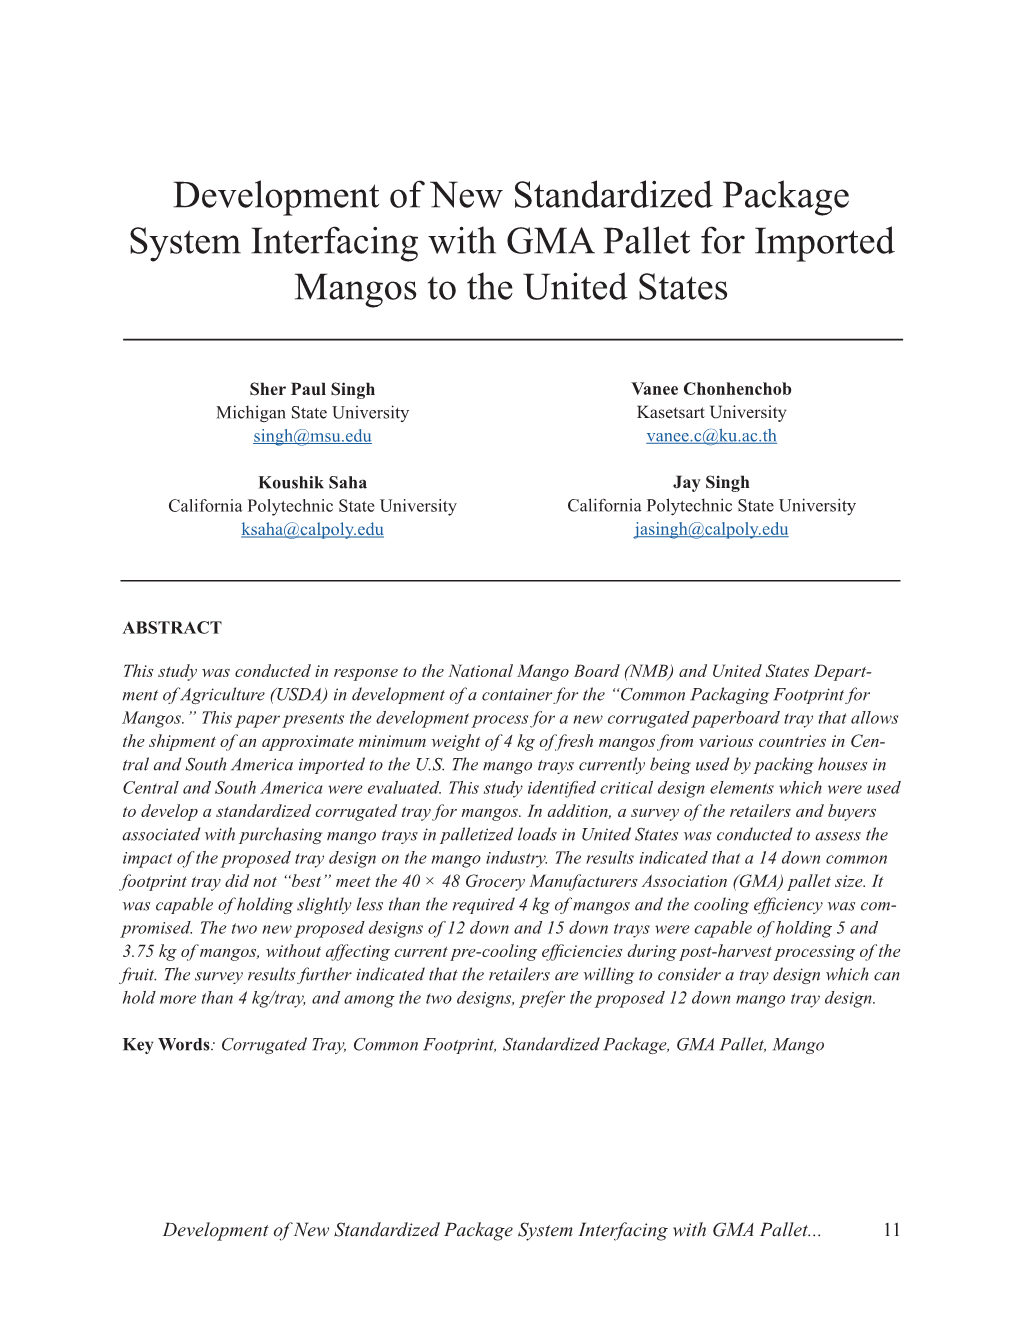 Development of New Standardized Package System Interfacing with GMA Pallet for Imported Mangos to the United States